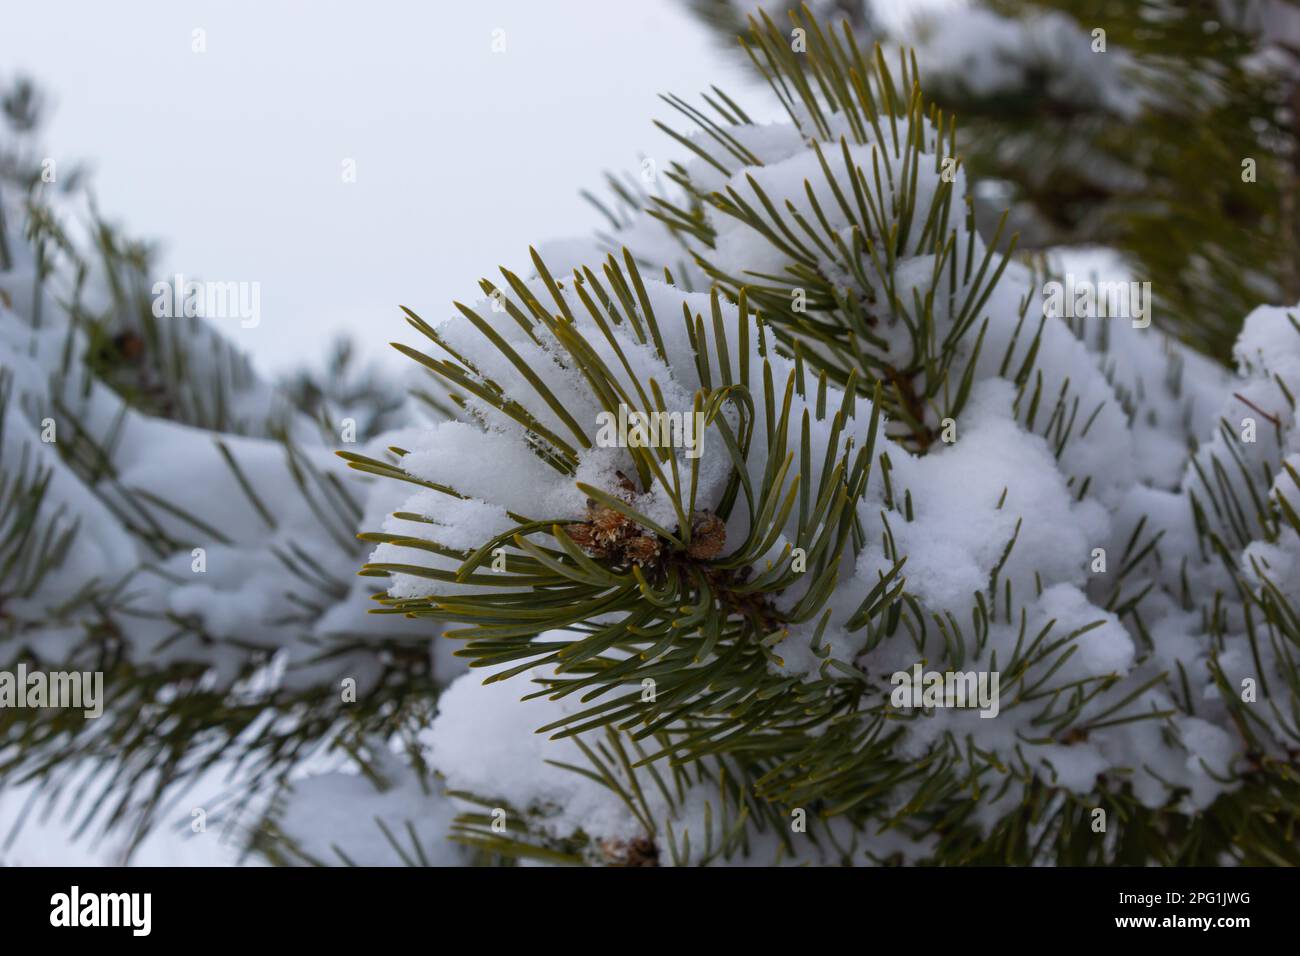 Snow-covered pine trees branches covered with snow frost. Perfect wintry wallpapers magical nature photography. Stock Photo